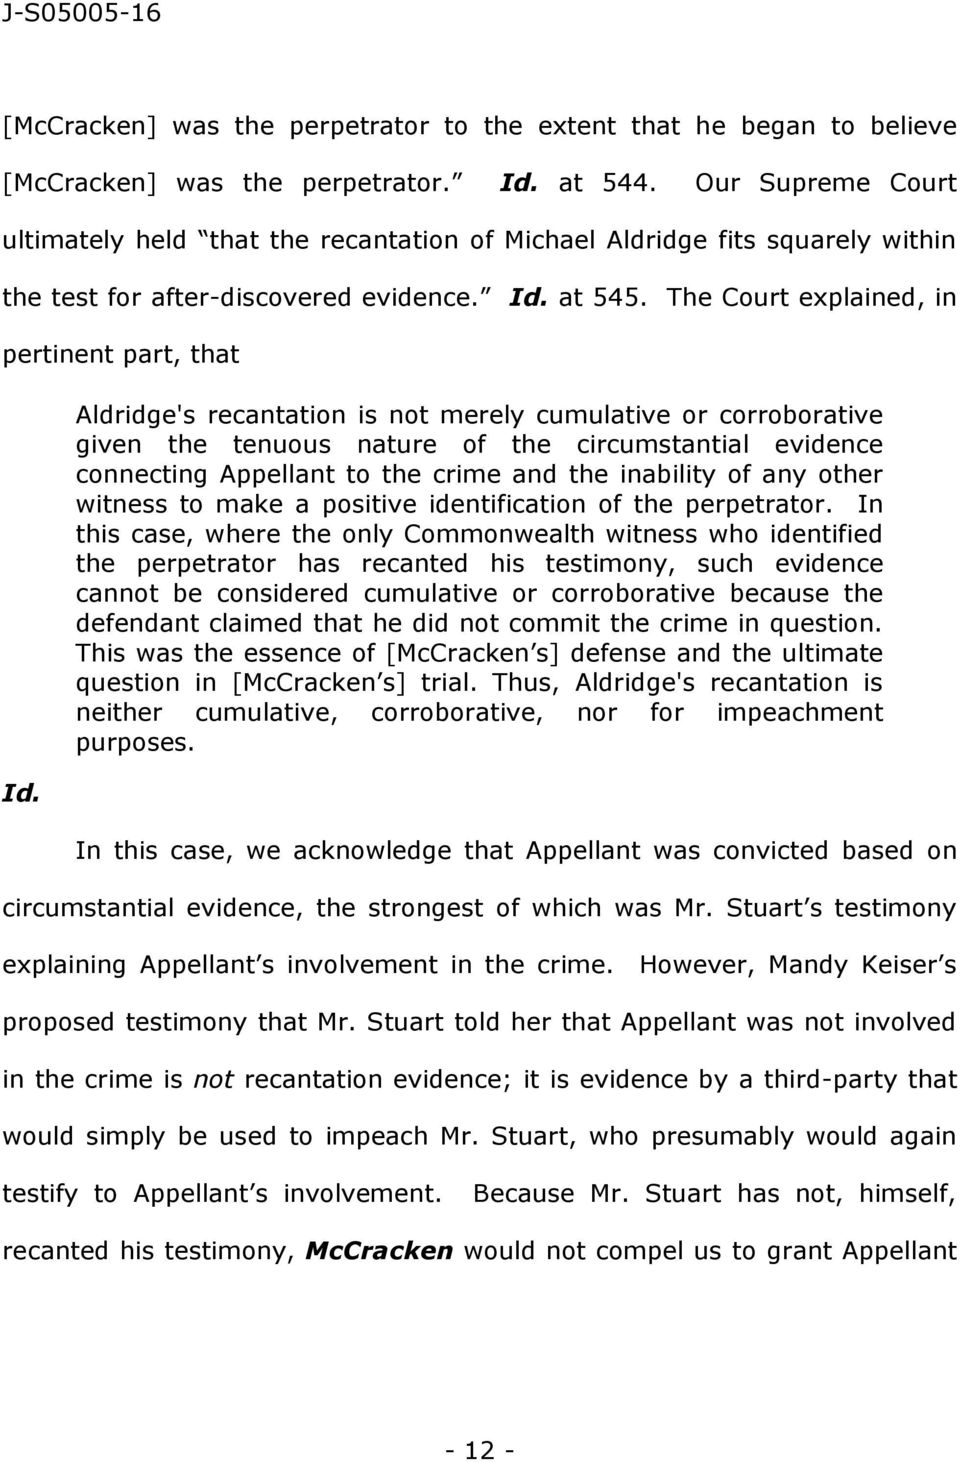 Aldridge's recantation is not merely cumulative or corroborative given the tenuous nature of the circumstantial evidence connecting Appellant to the crime and the inability of any other witness to